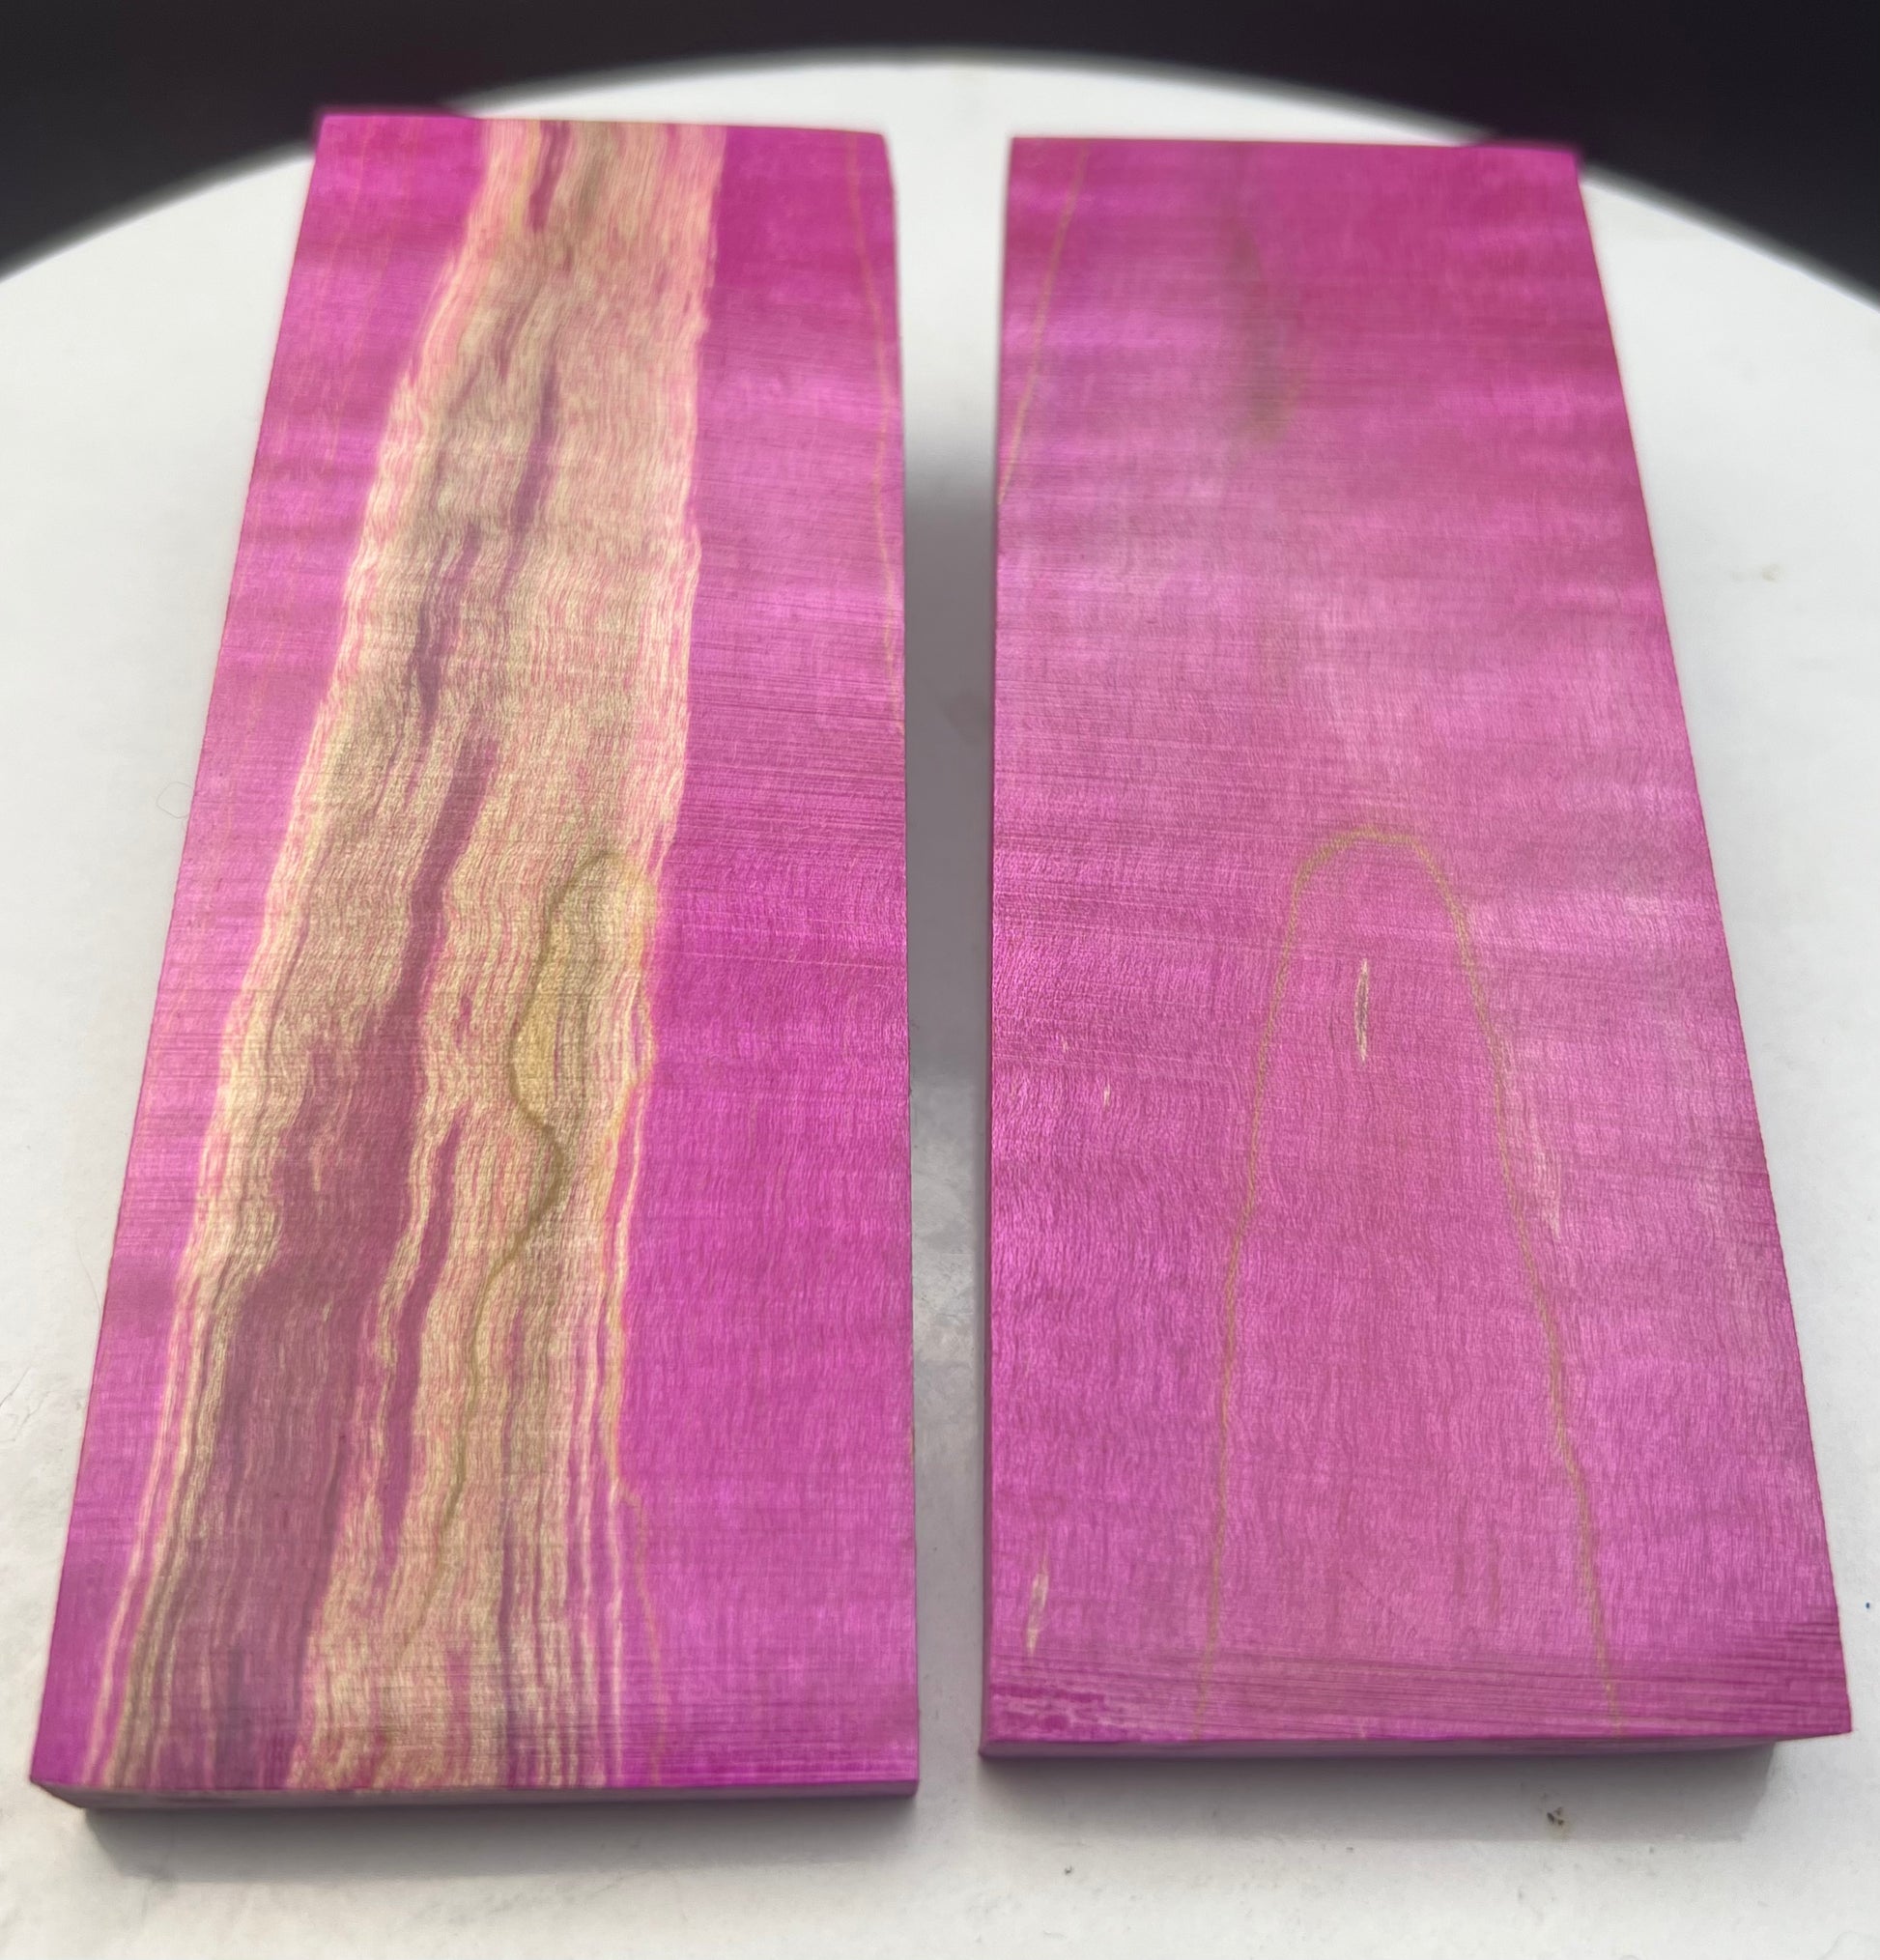 Stabilized Curly Maple knife Scales Magenta